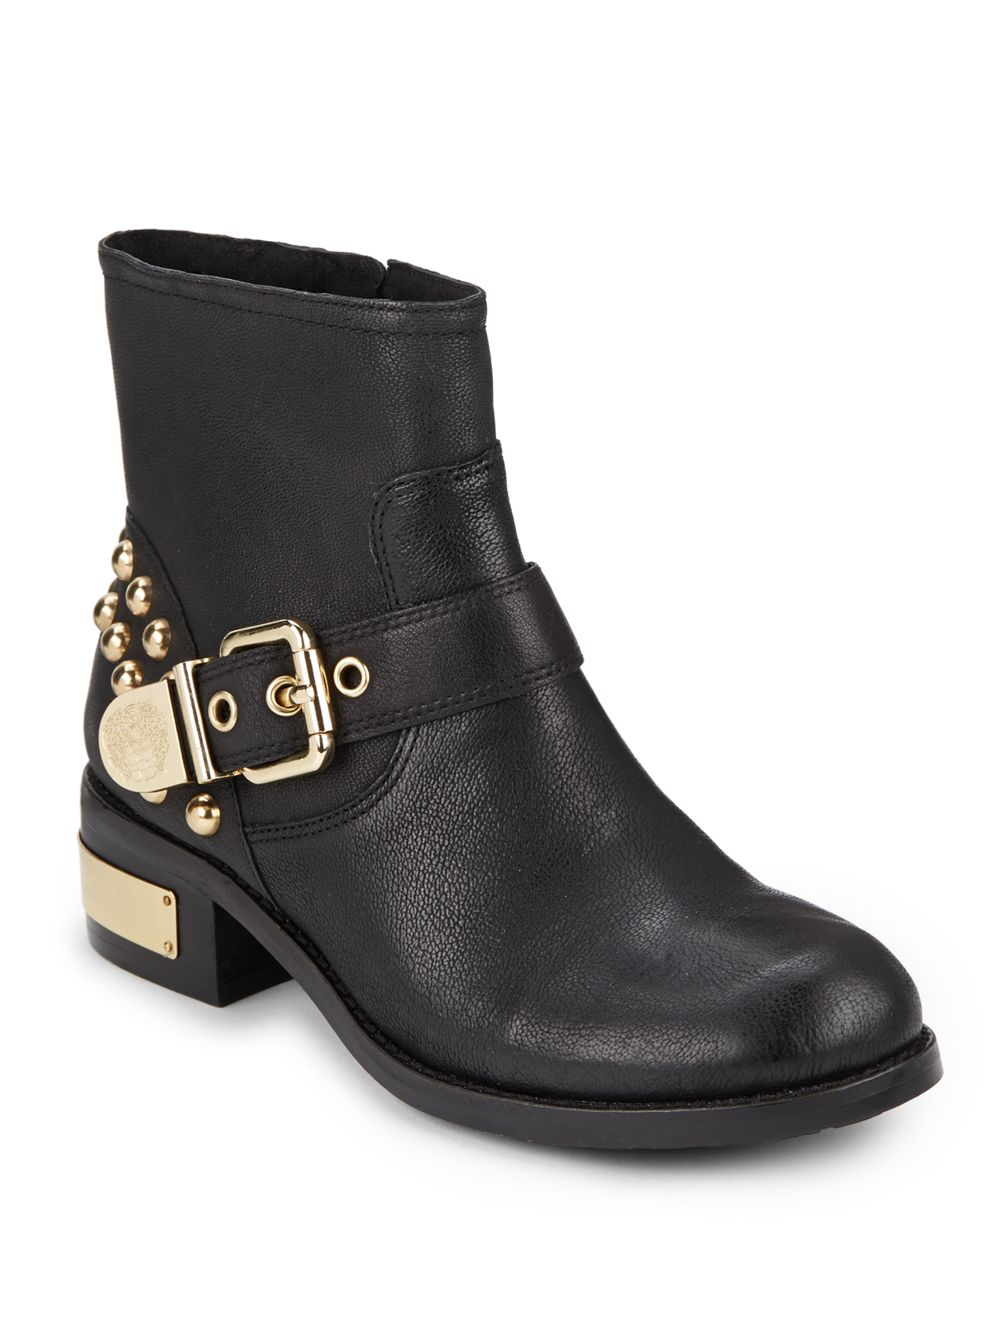 Vince Camuto Windetta Studded Leather Ankle Boots in Black | Lyst